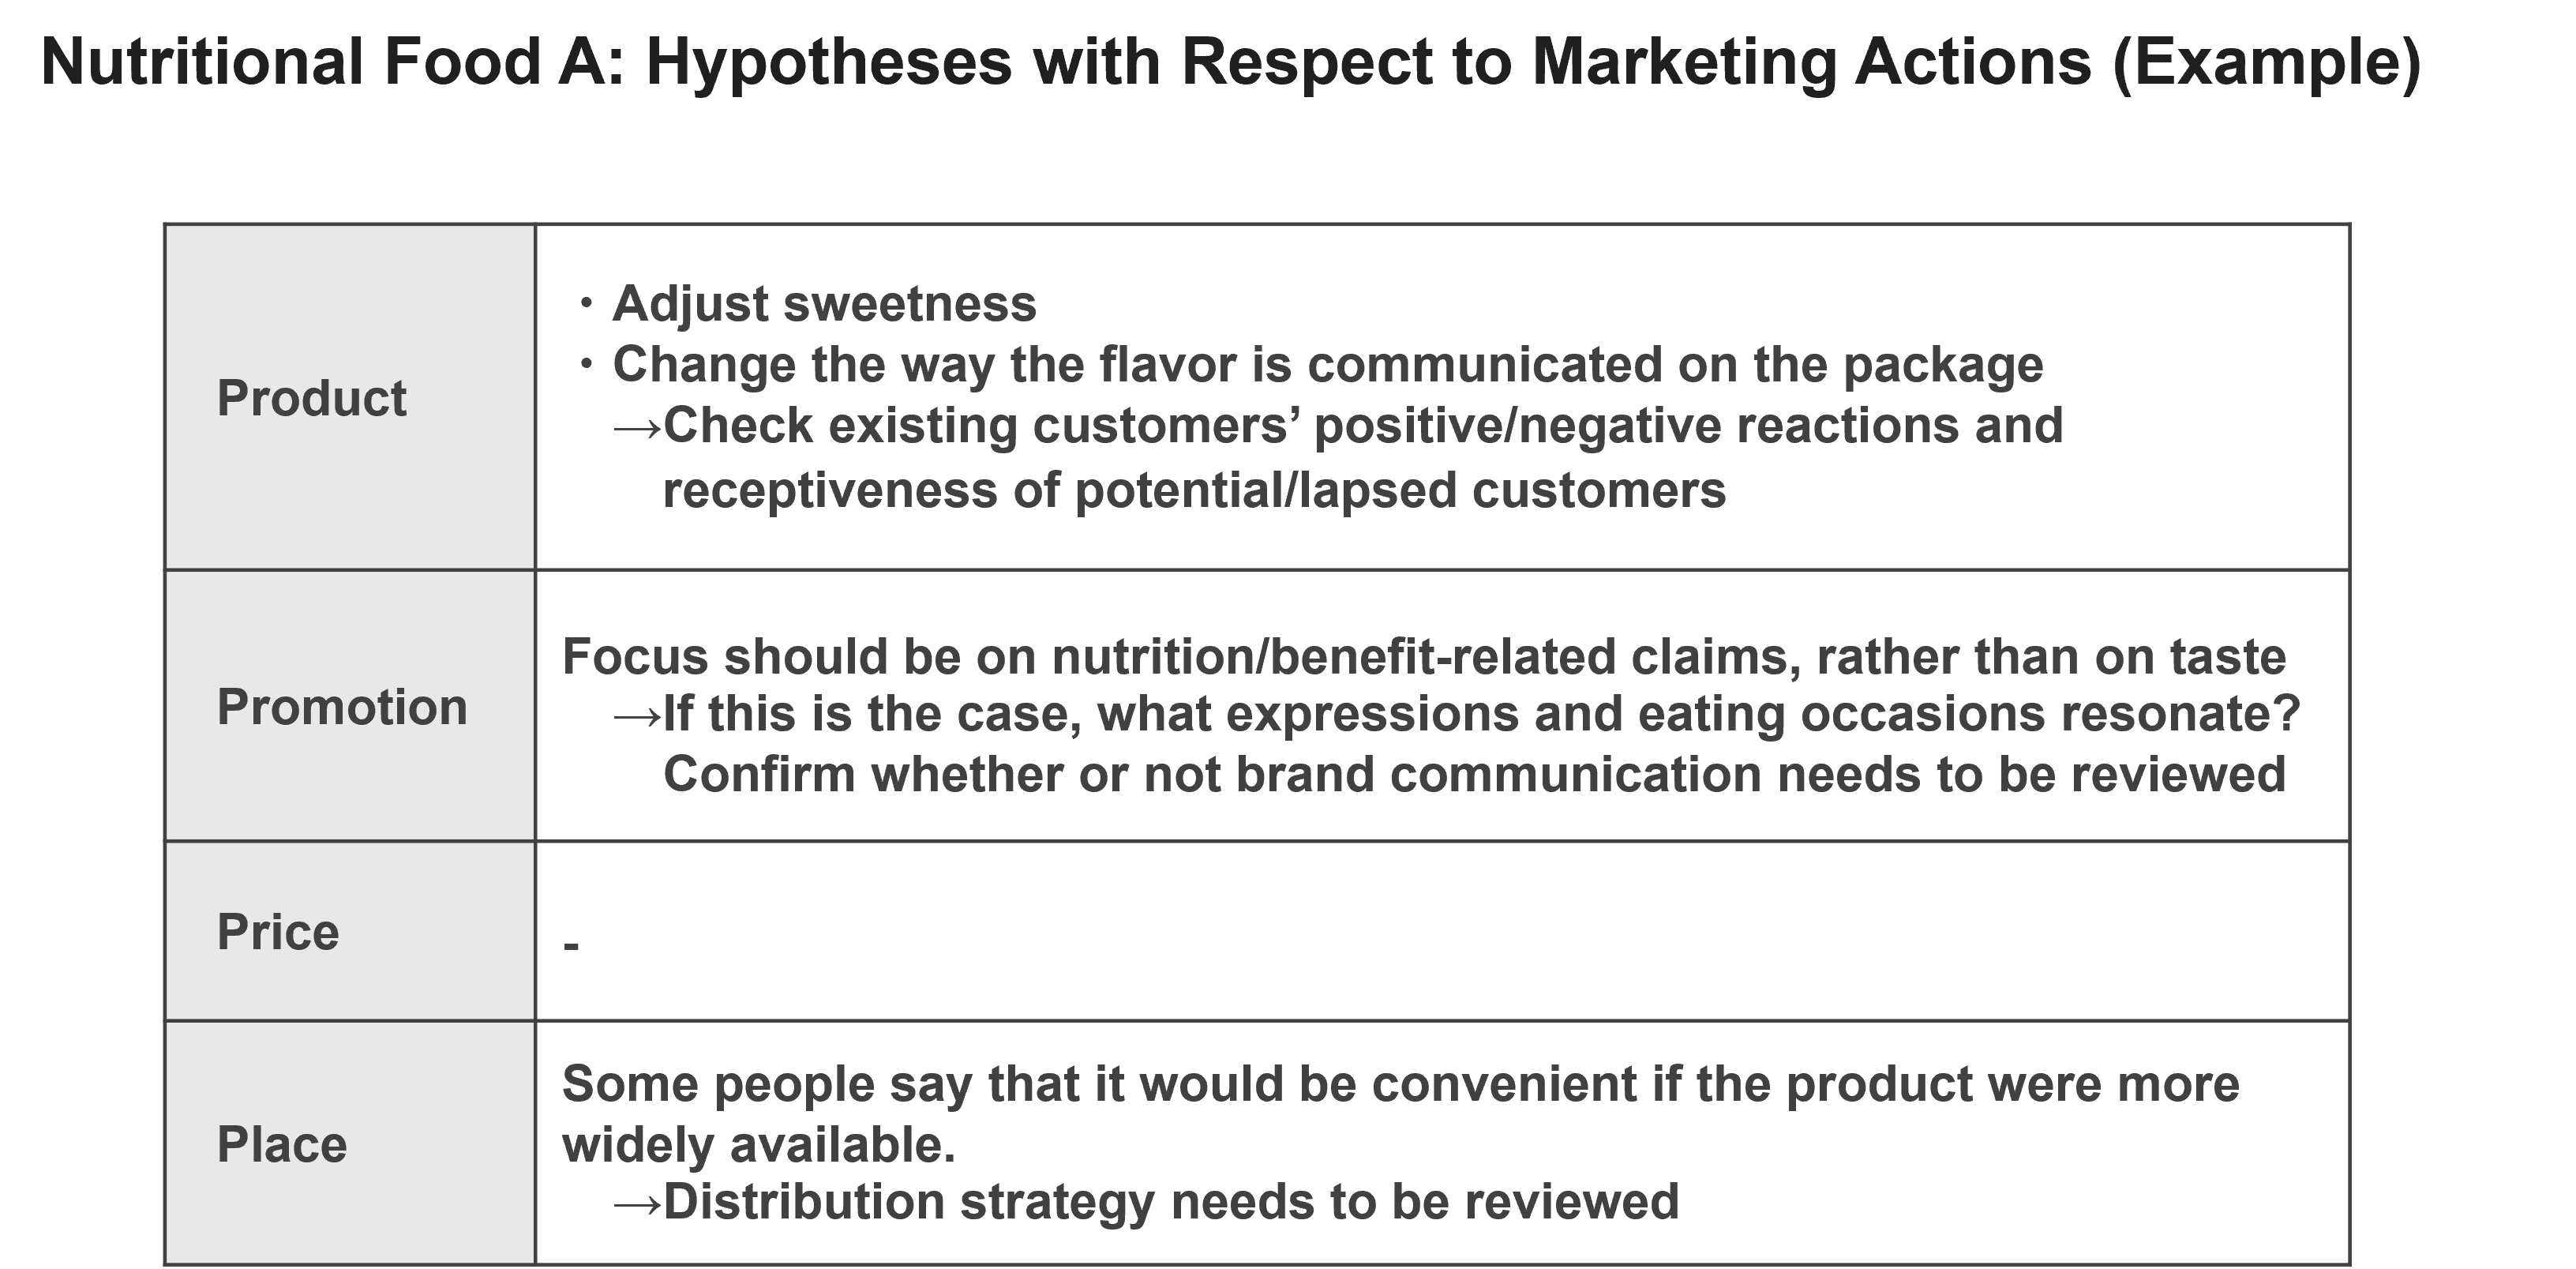 Nutritional Food A: Hypotheses with Respect to Marketing Actions(Example)